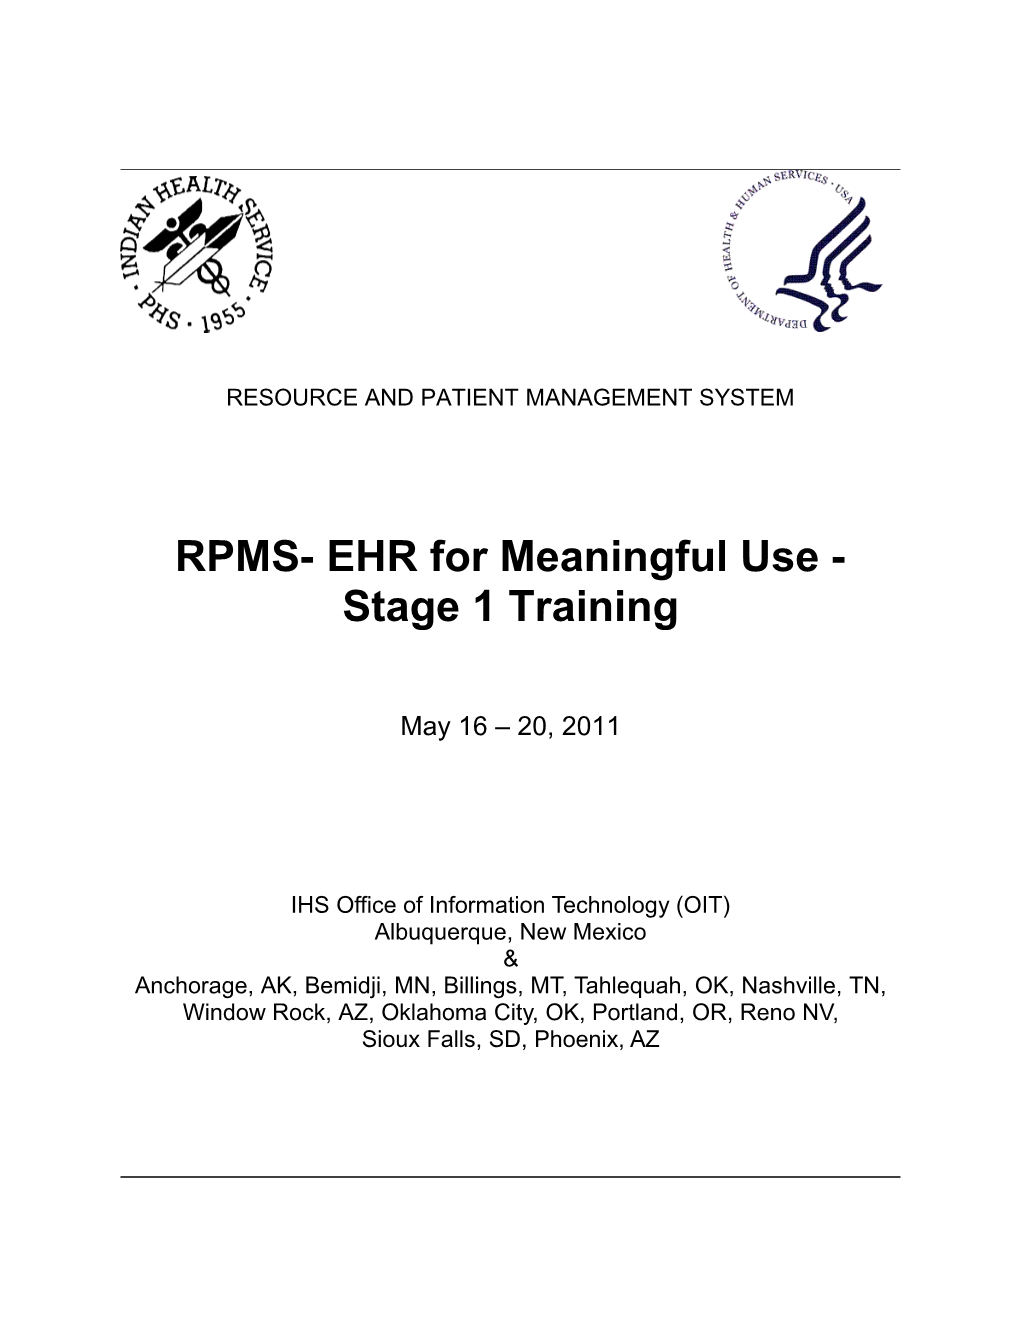 RPMS-EHR Meaningful Use Course